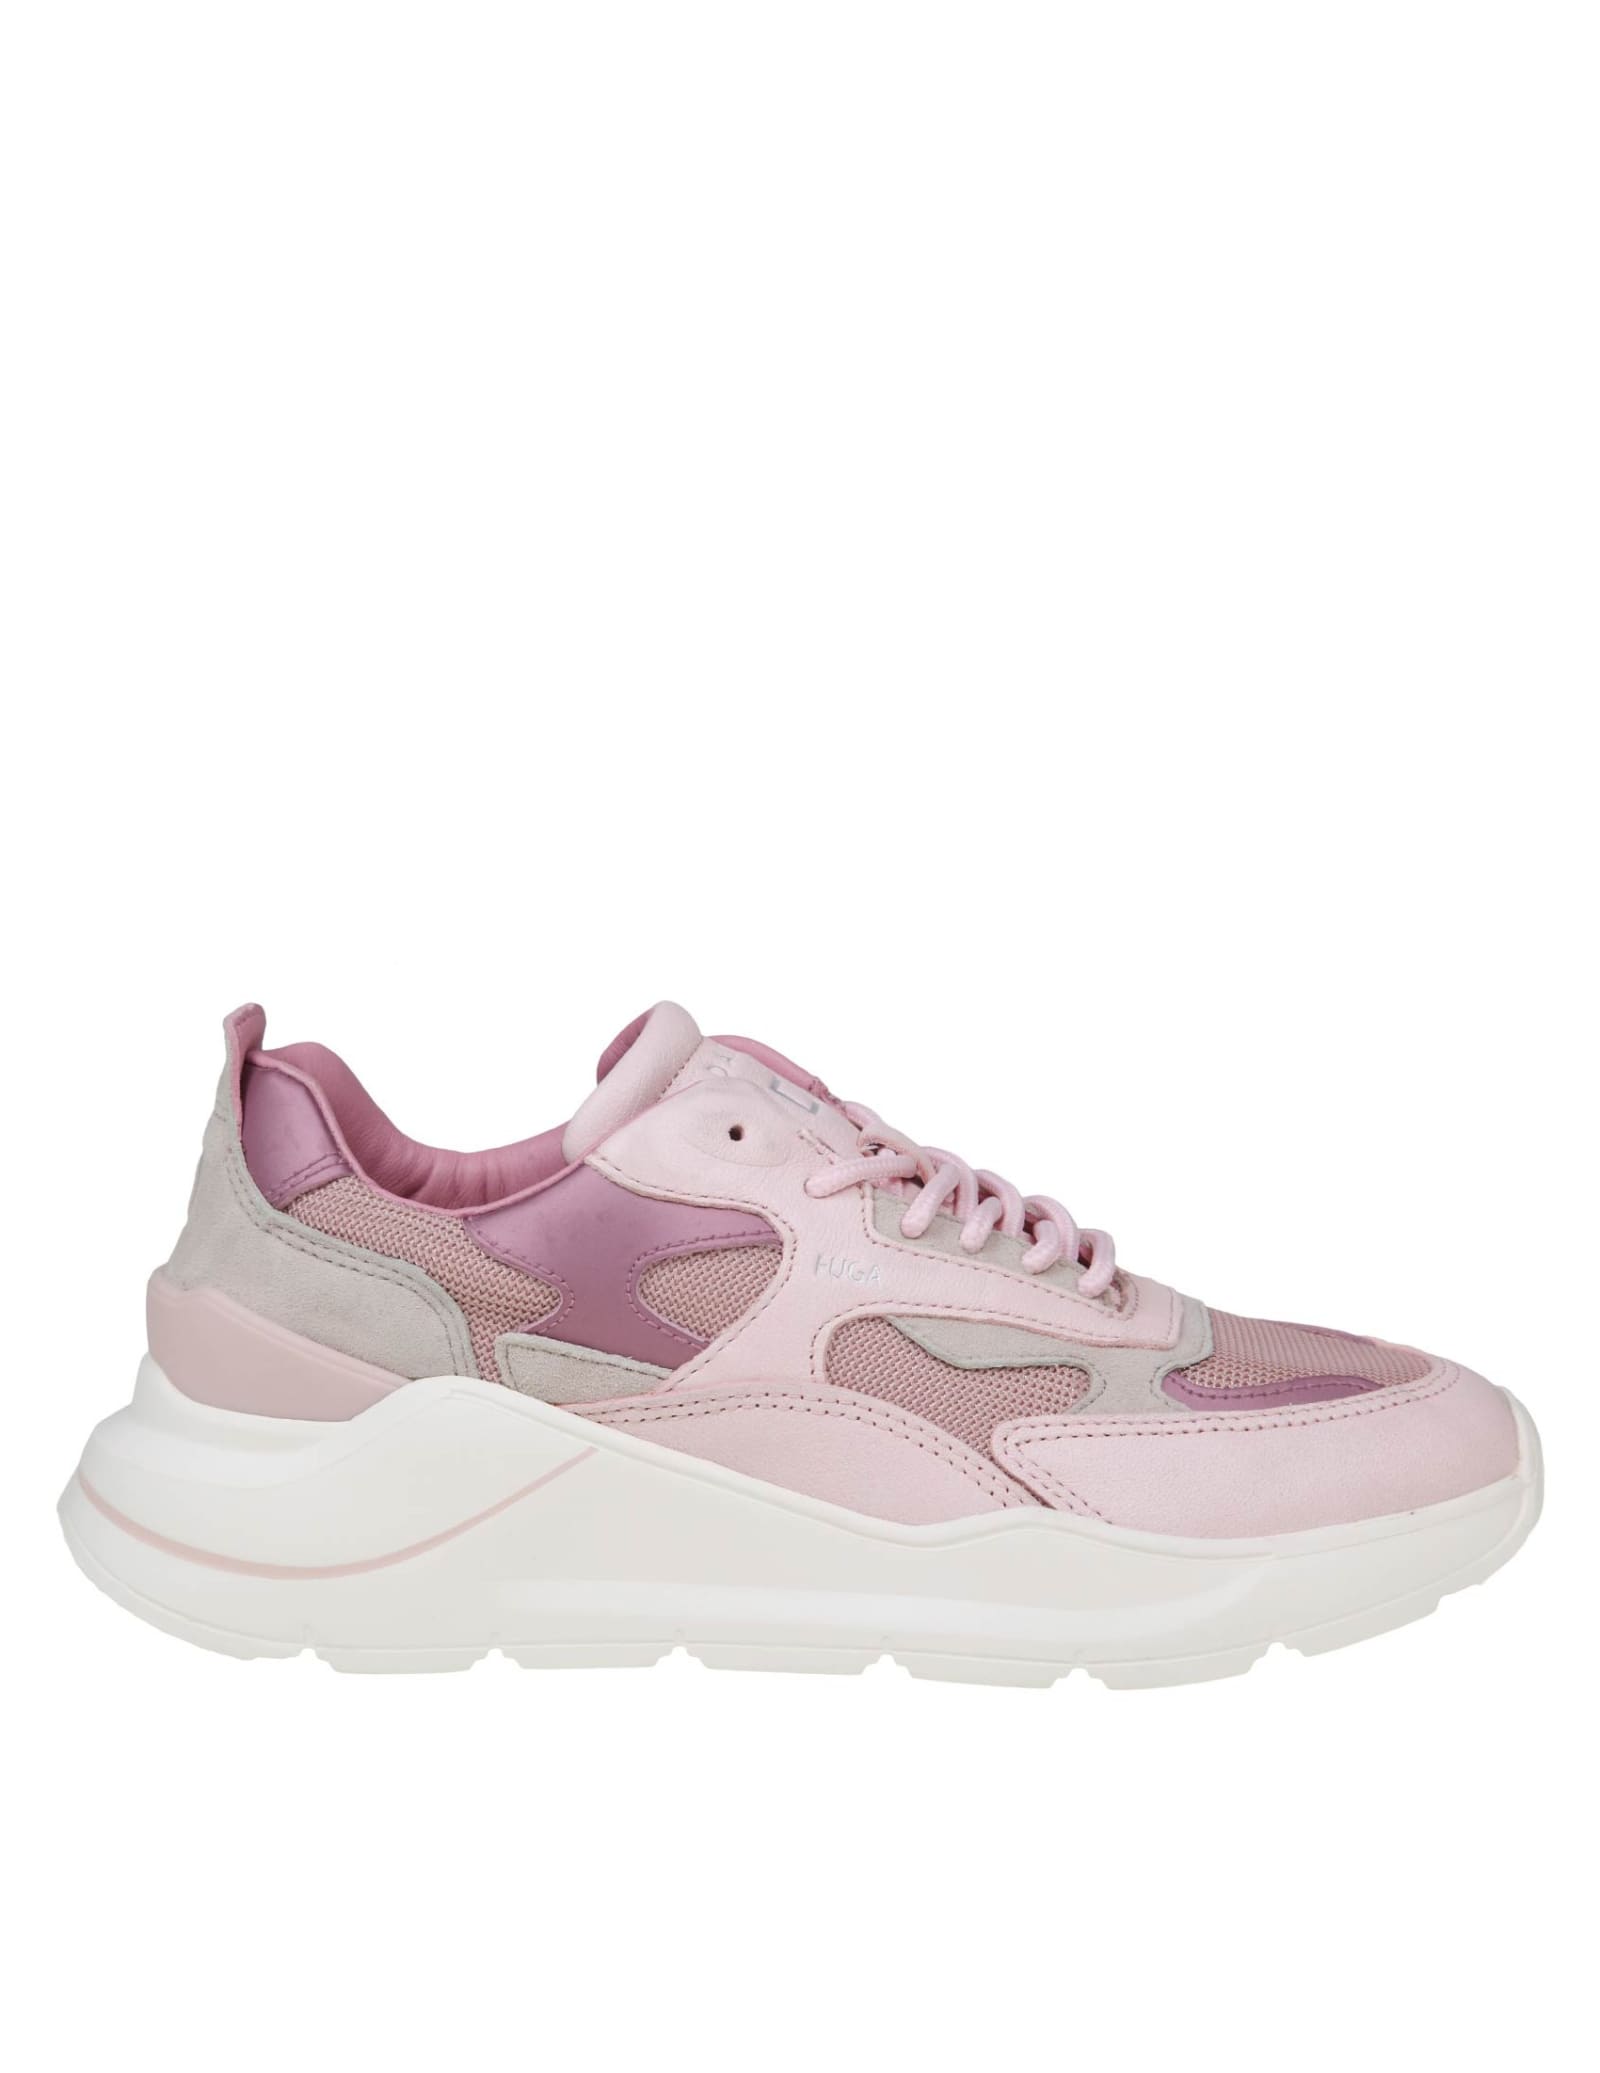 DATE FUGA MONO SNEAKERS IN PINK LEATHER AND FABRIC